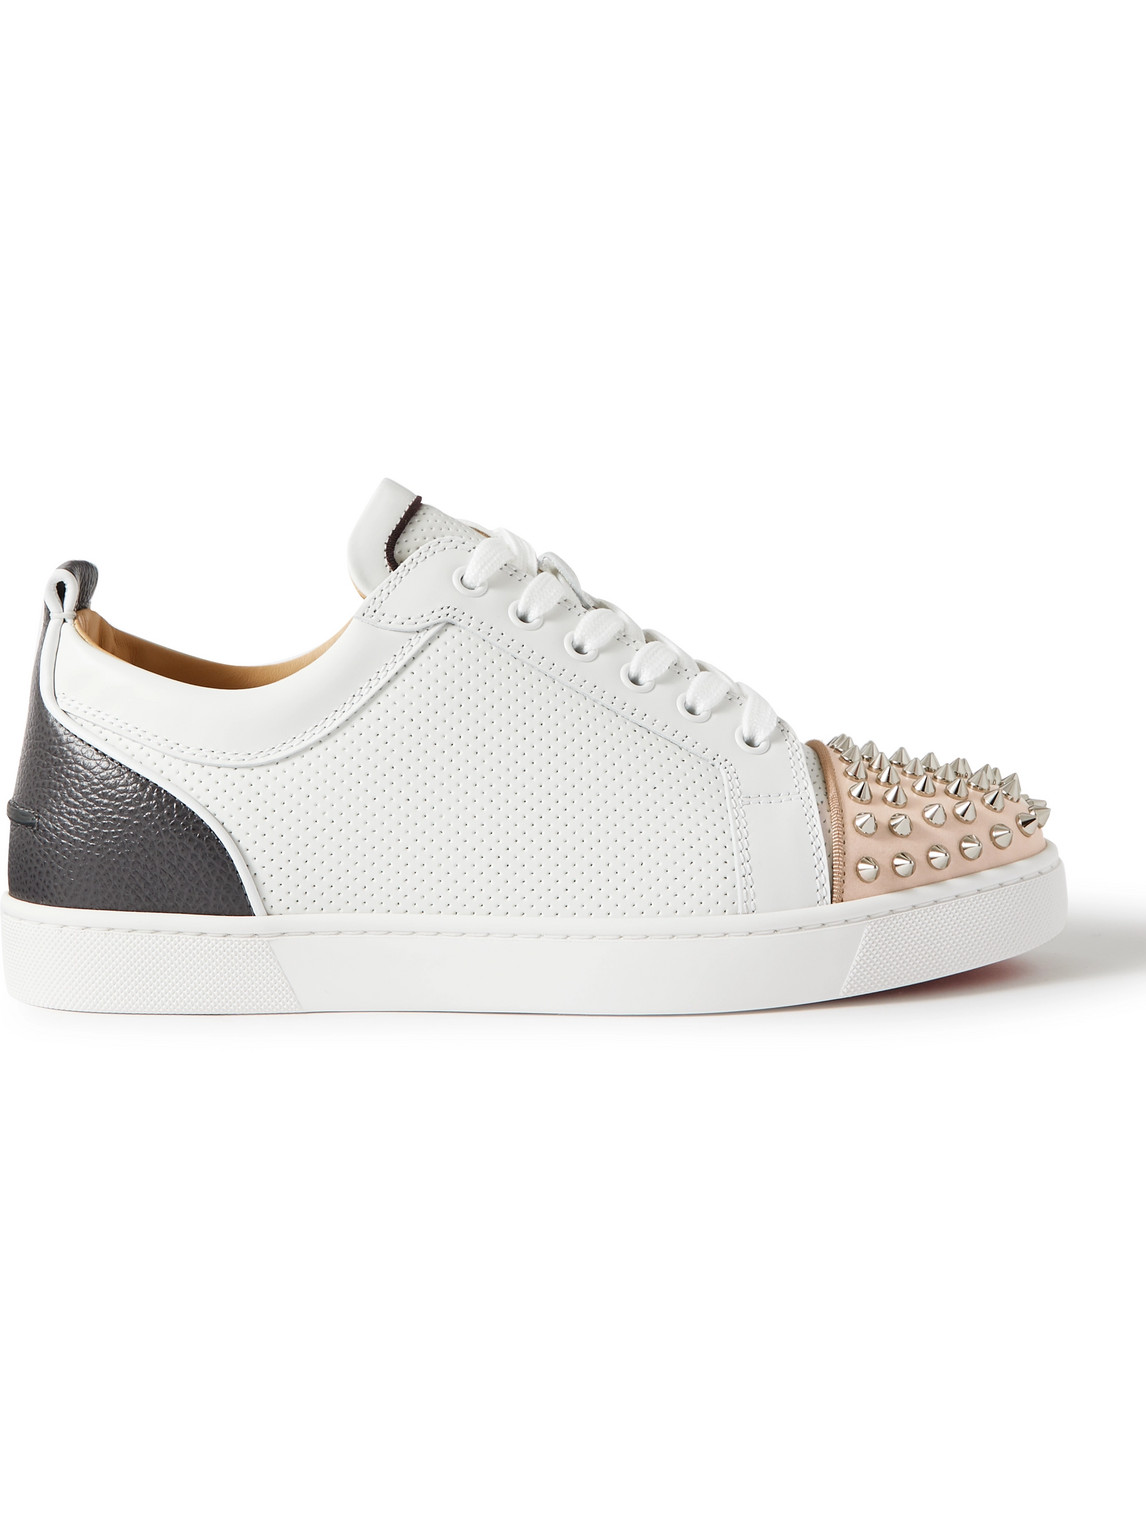 Christian Louboutin Louis Junior Spikes Cap-toe Leather Sneakers In White